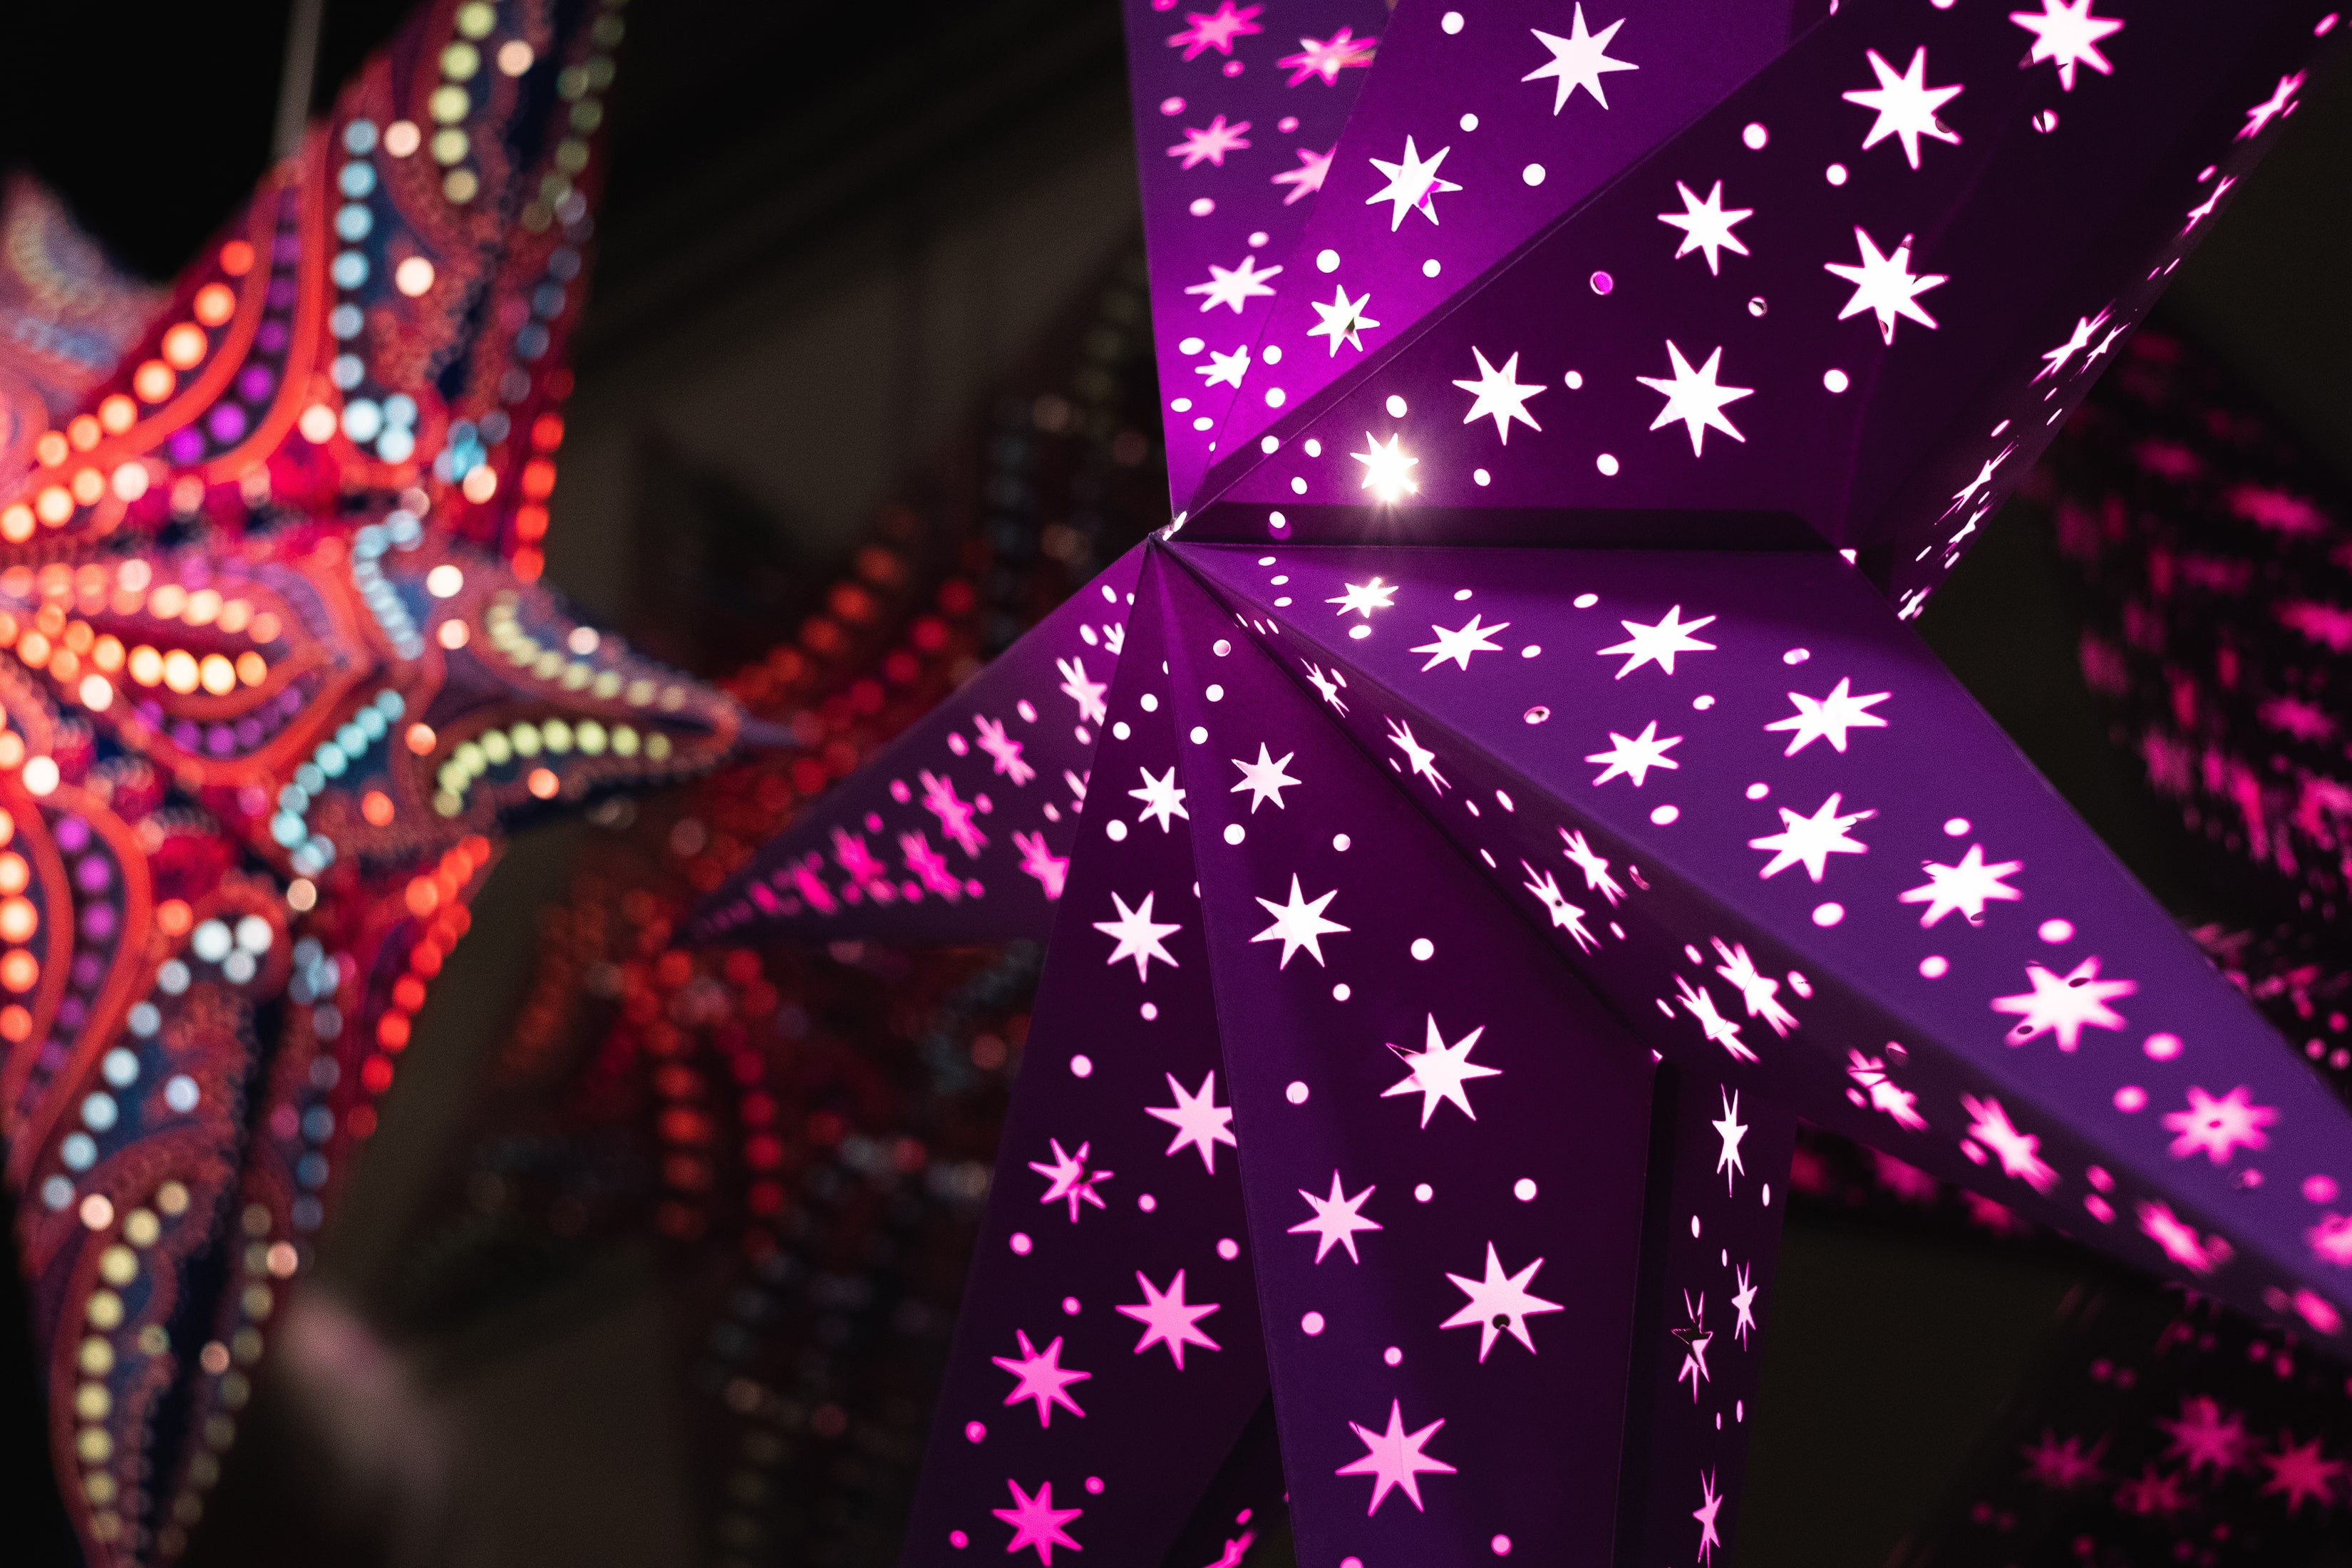 Large Paper Star Lanterns and Lights